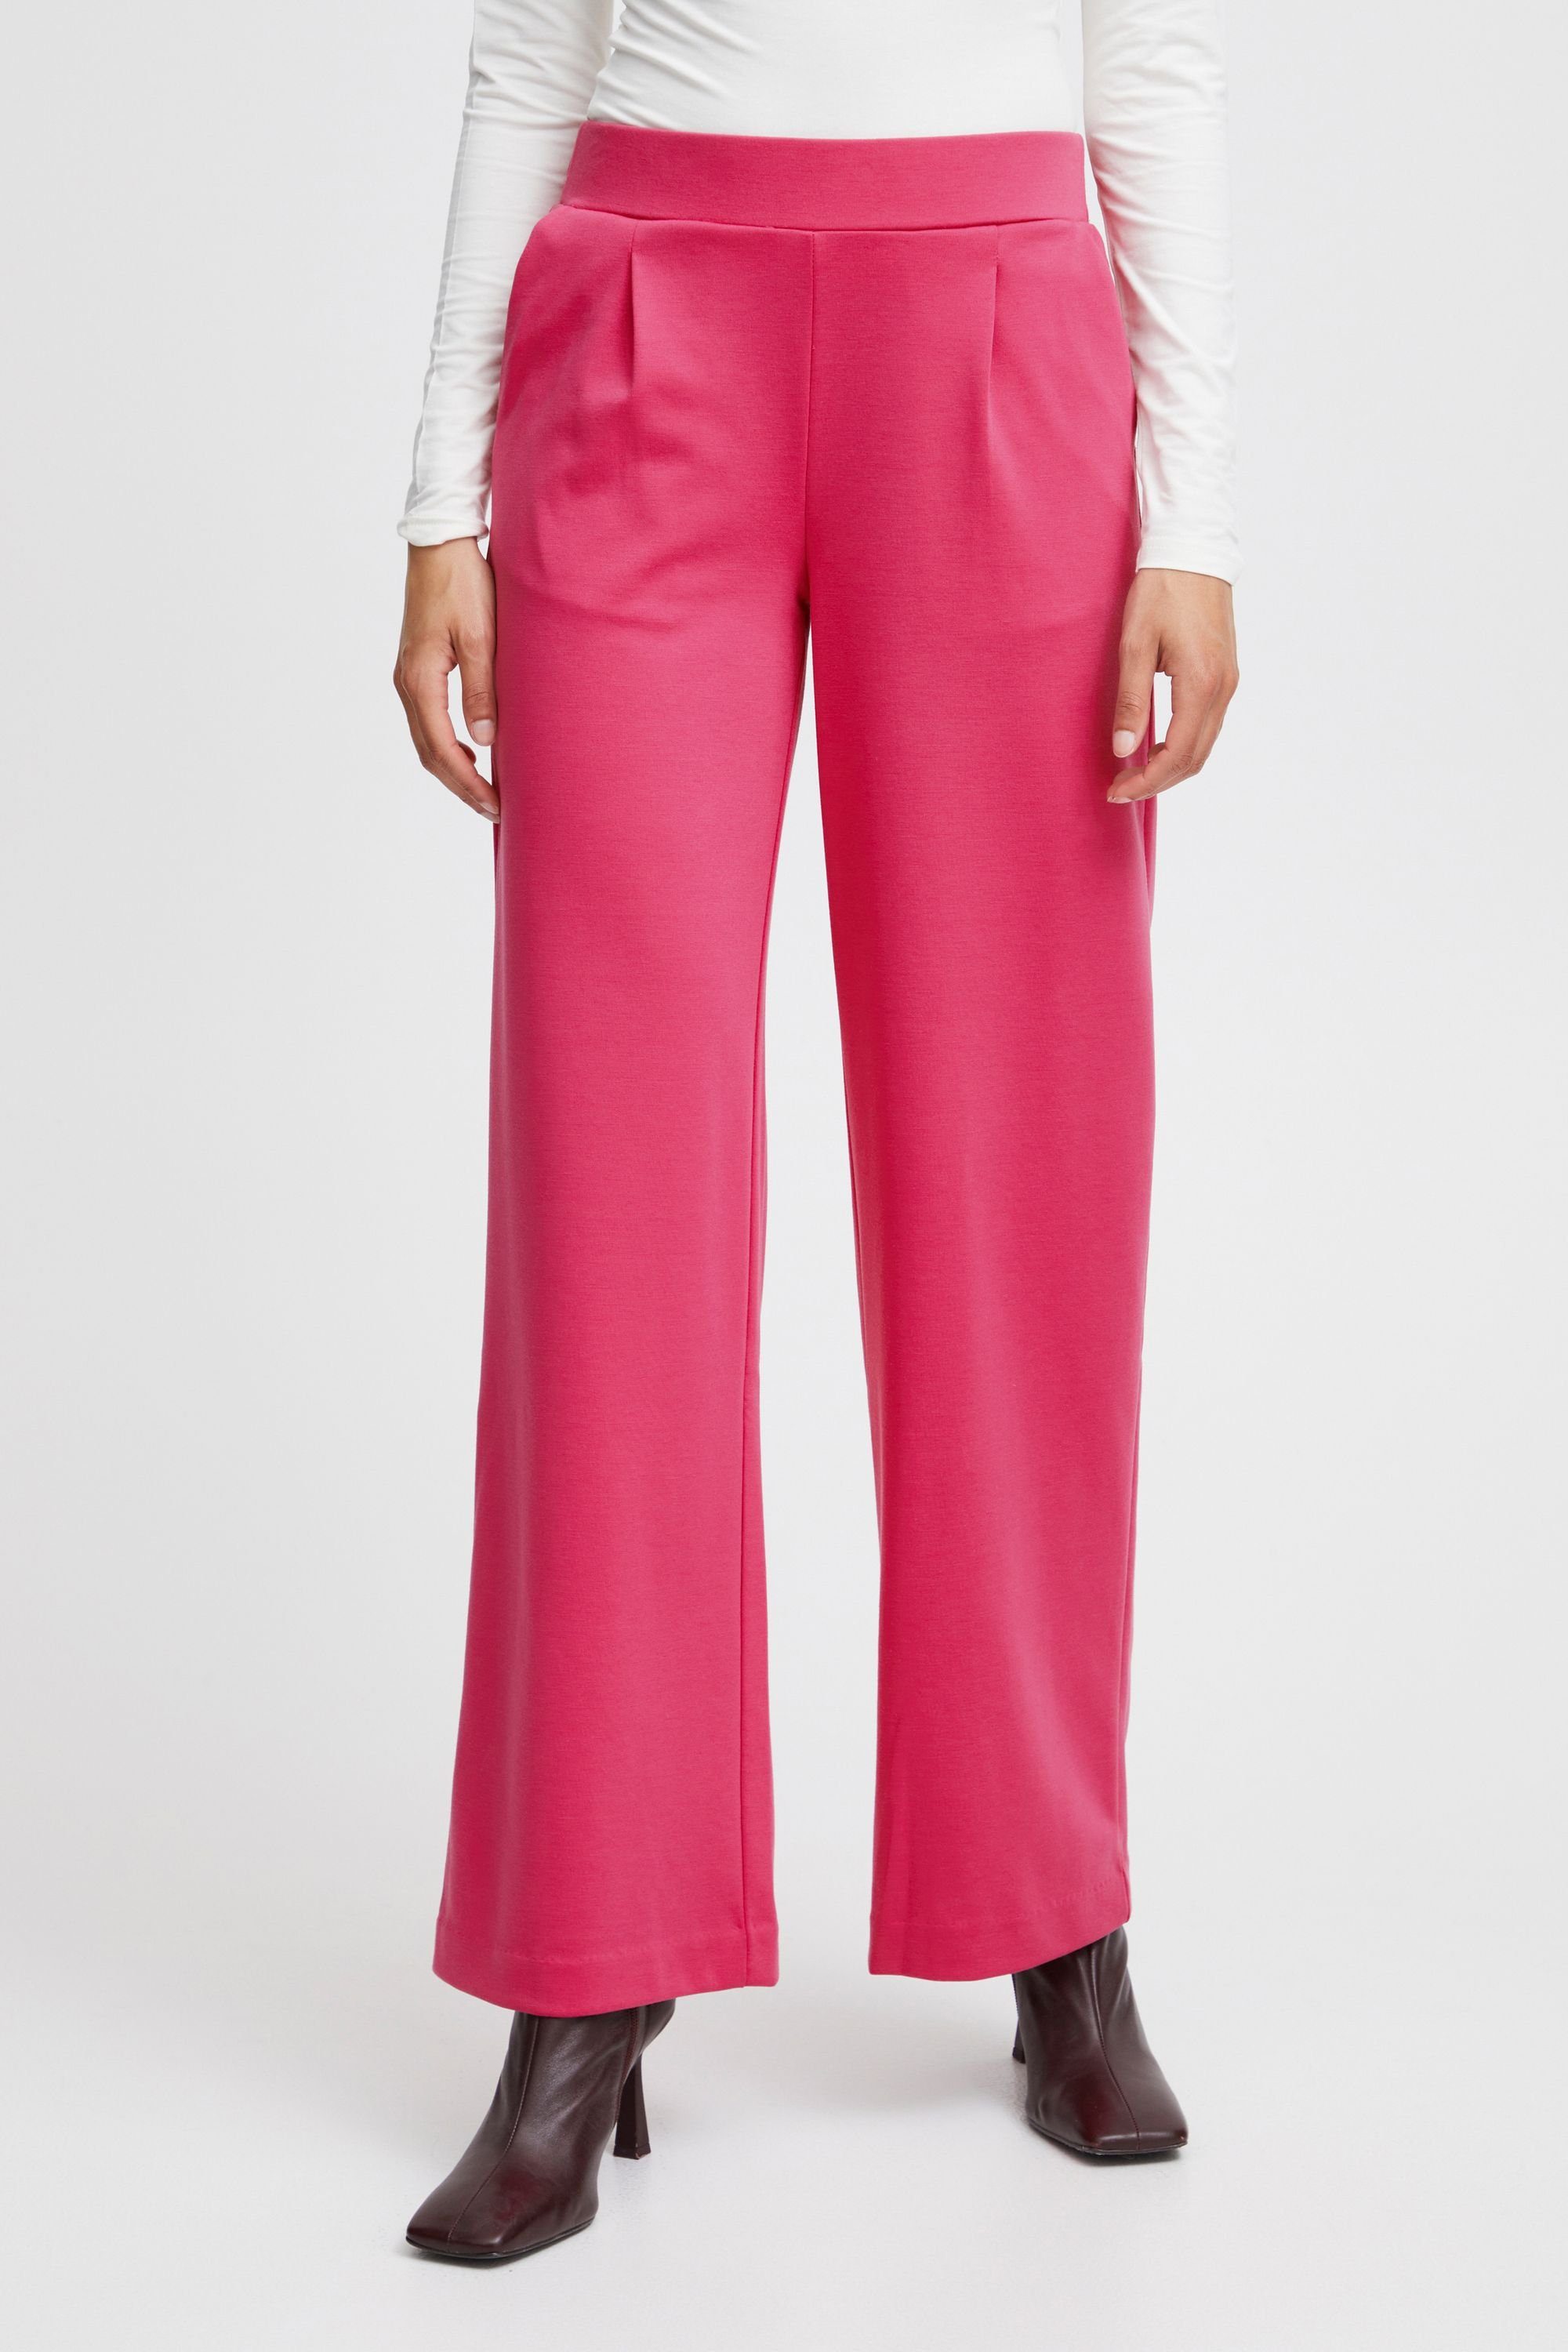 b.young Stoffhose BYRIZETTA 2 WIDE PANTS 2 - 20812847